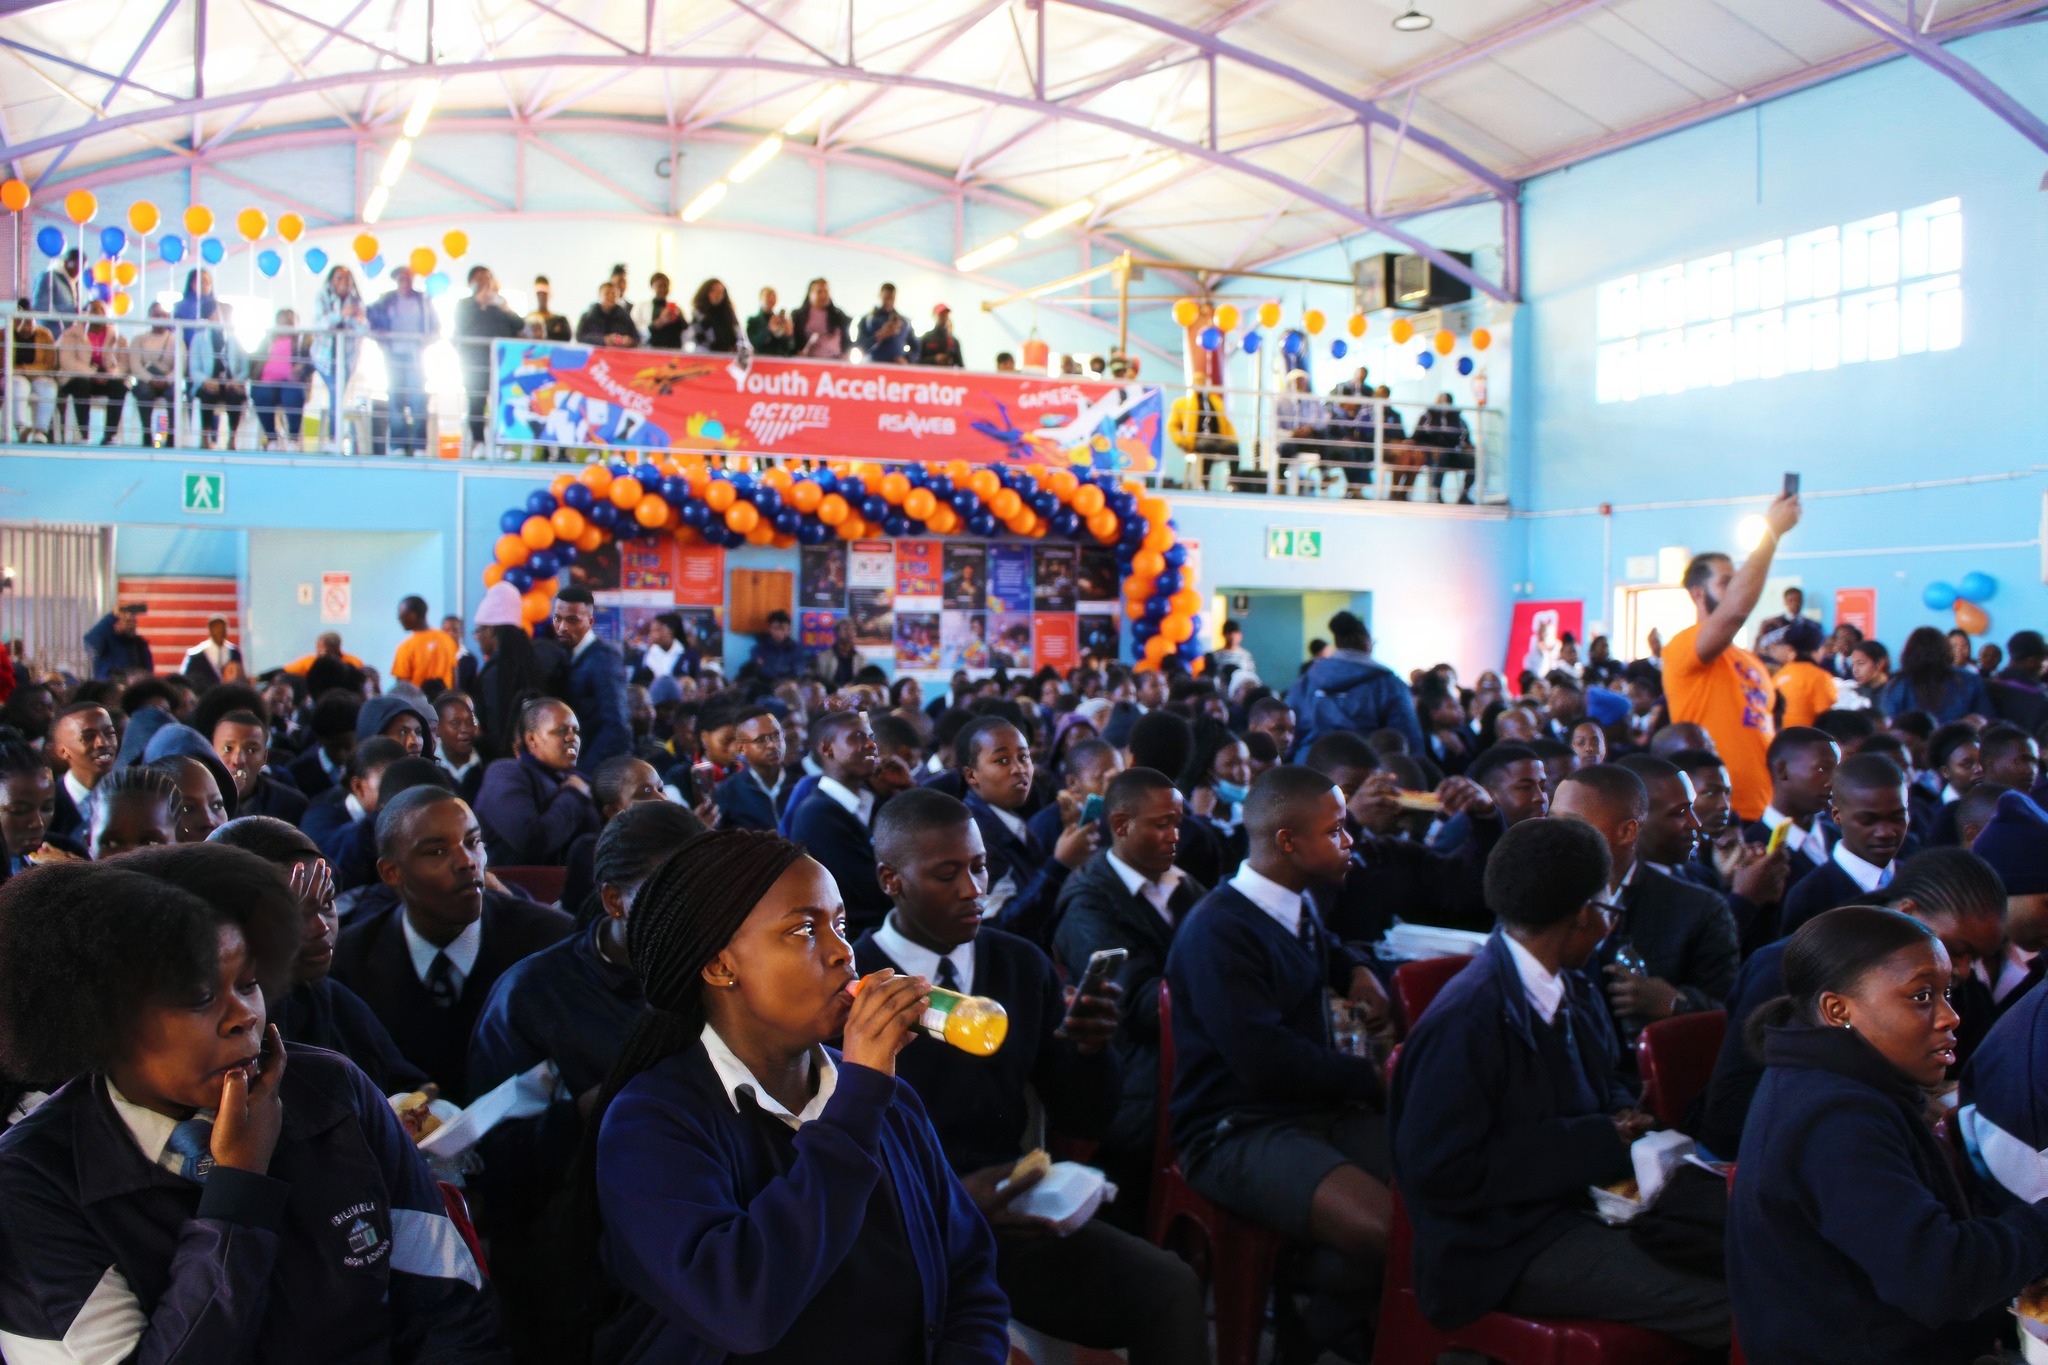 From Dreams to Reality: Octotel Youth Accelerator Ignites Hope in Langa Township!